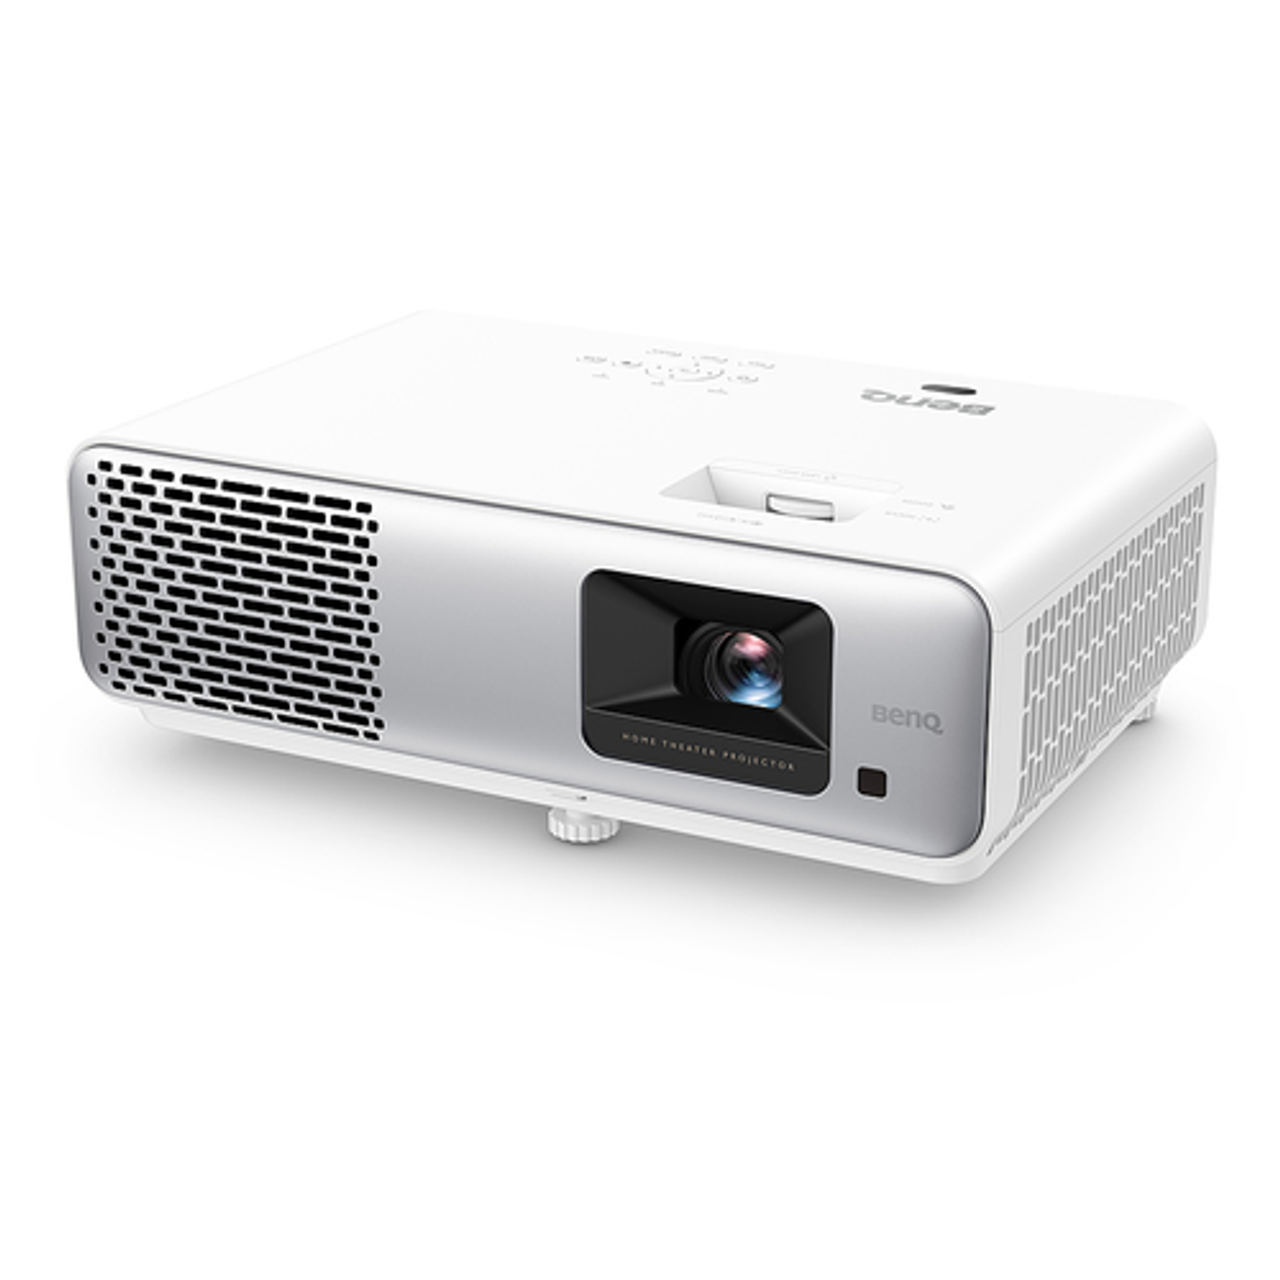 BenQ HT2060 1080p HDR LED Home Theater Projector with Lens Shift & Low Latency - White